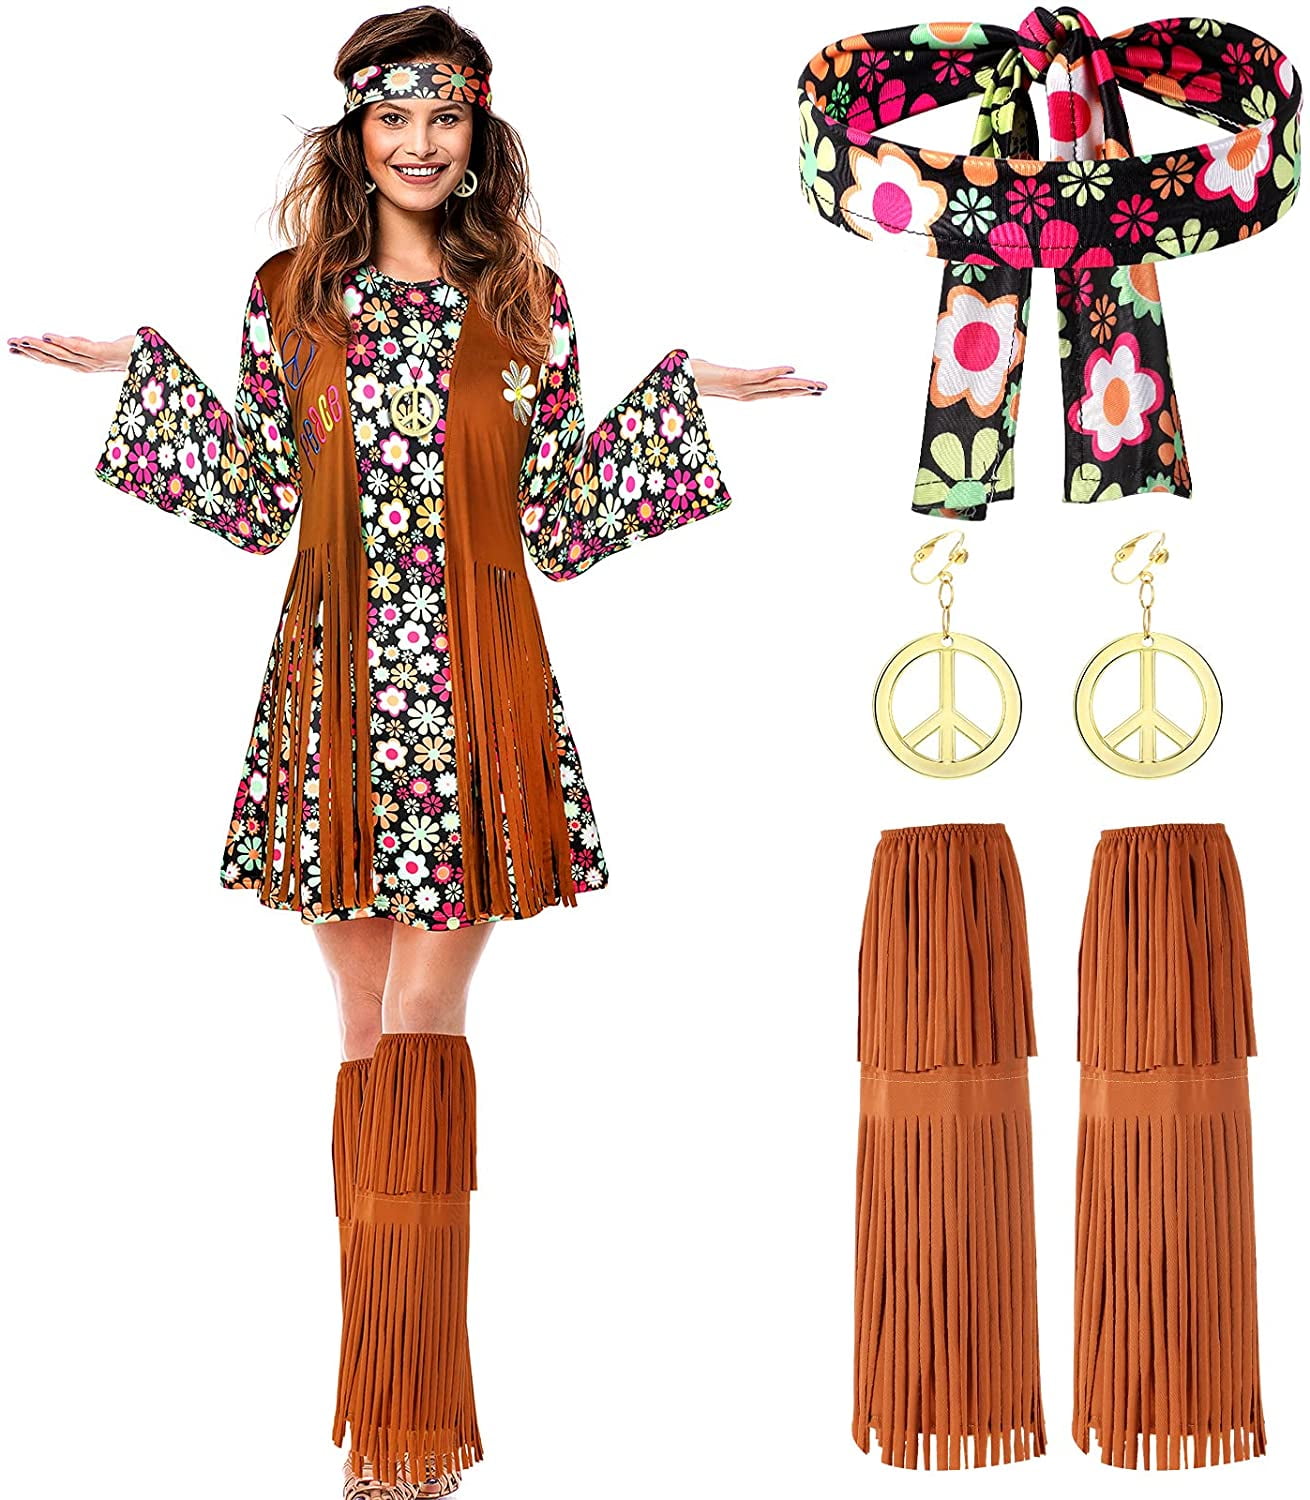 Mingshuo 70s 60s Hippie Costume Set 70s Outfits Accessories for ...